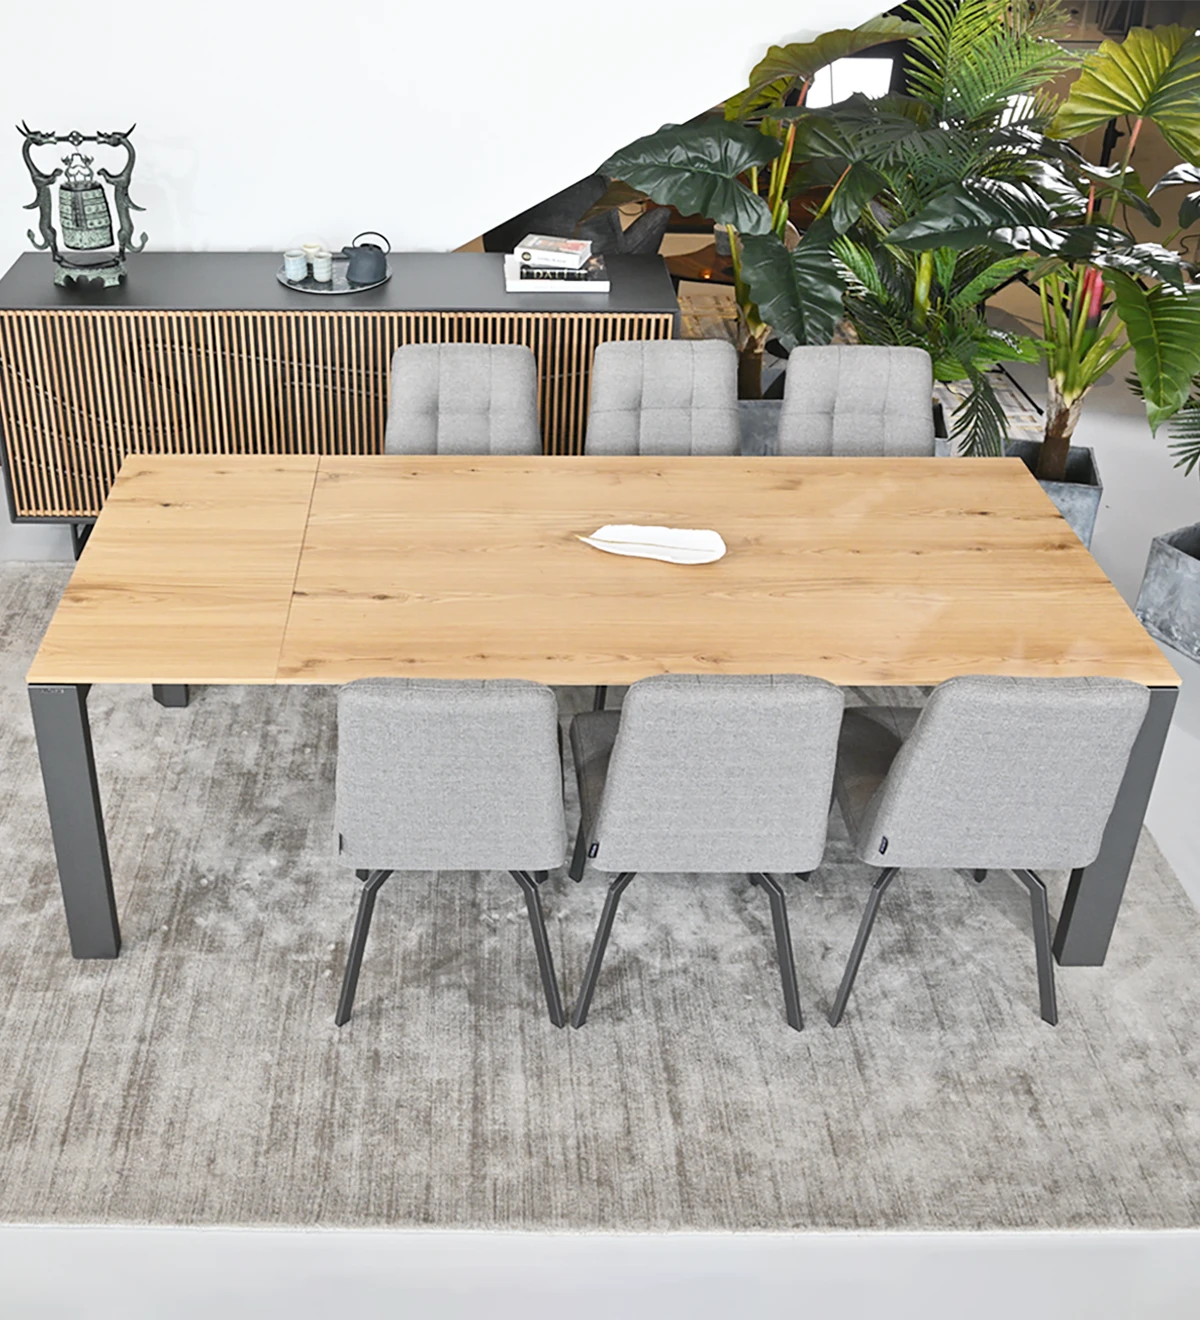 Rectangular extendable dining table with natural oak top, black lacquered metal legs.